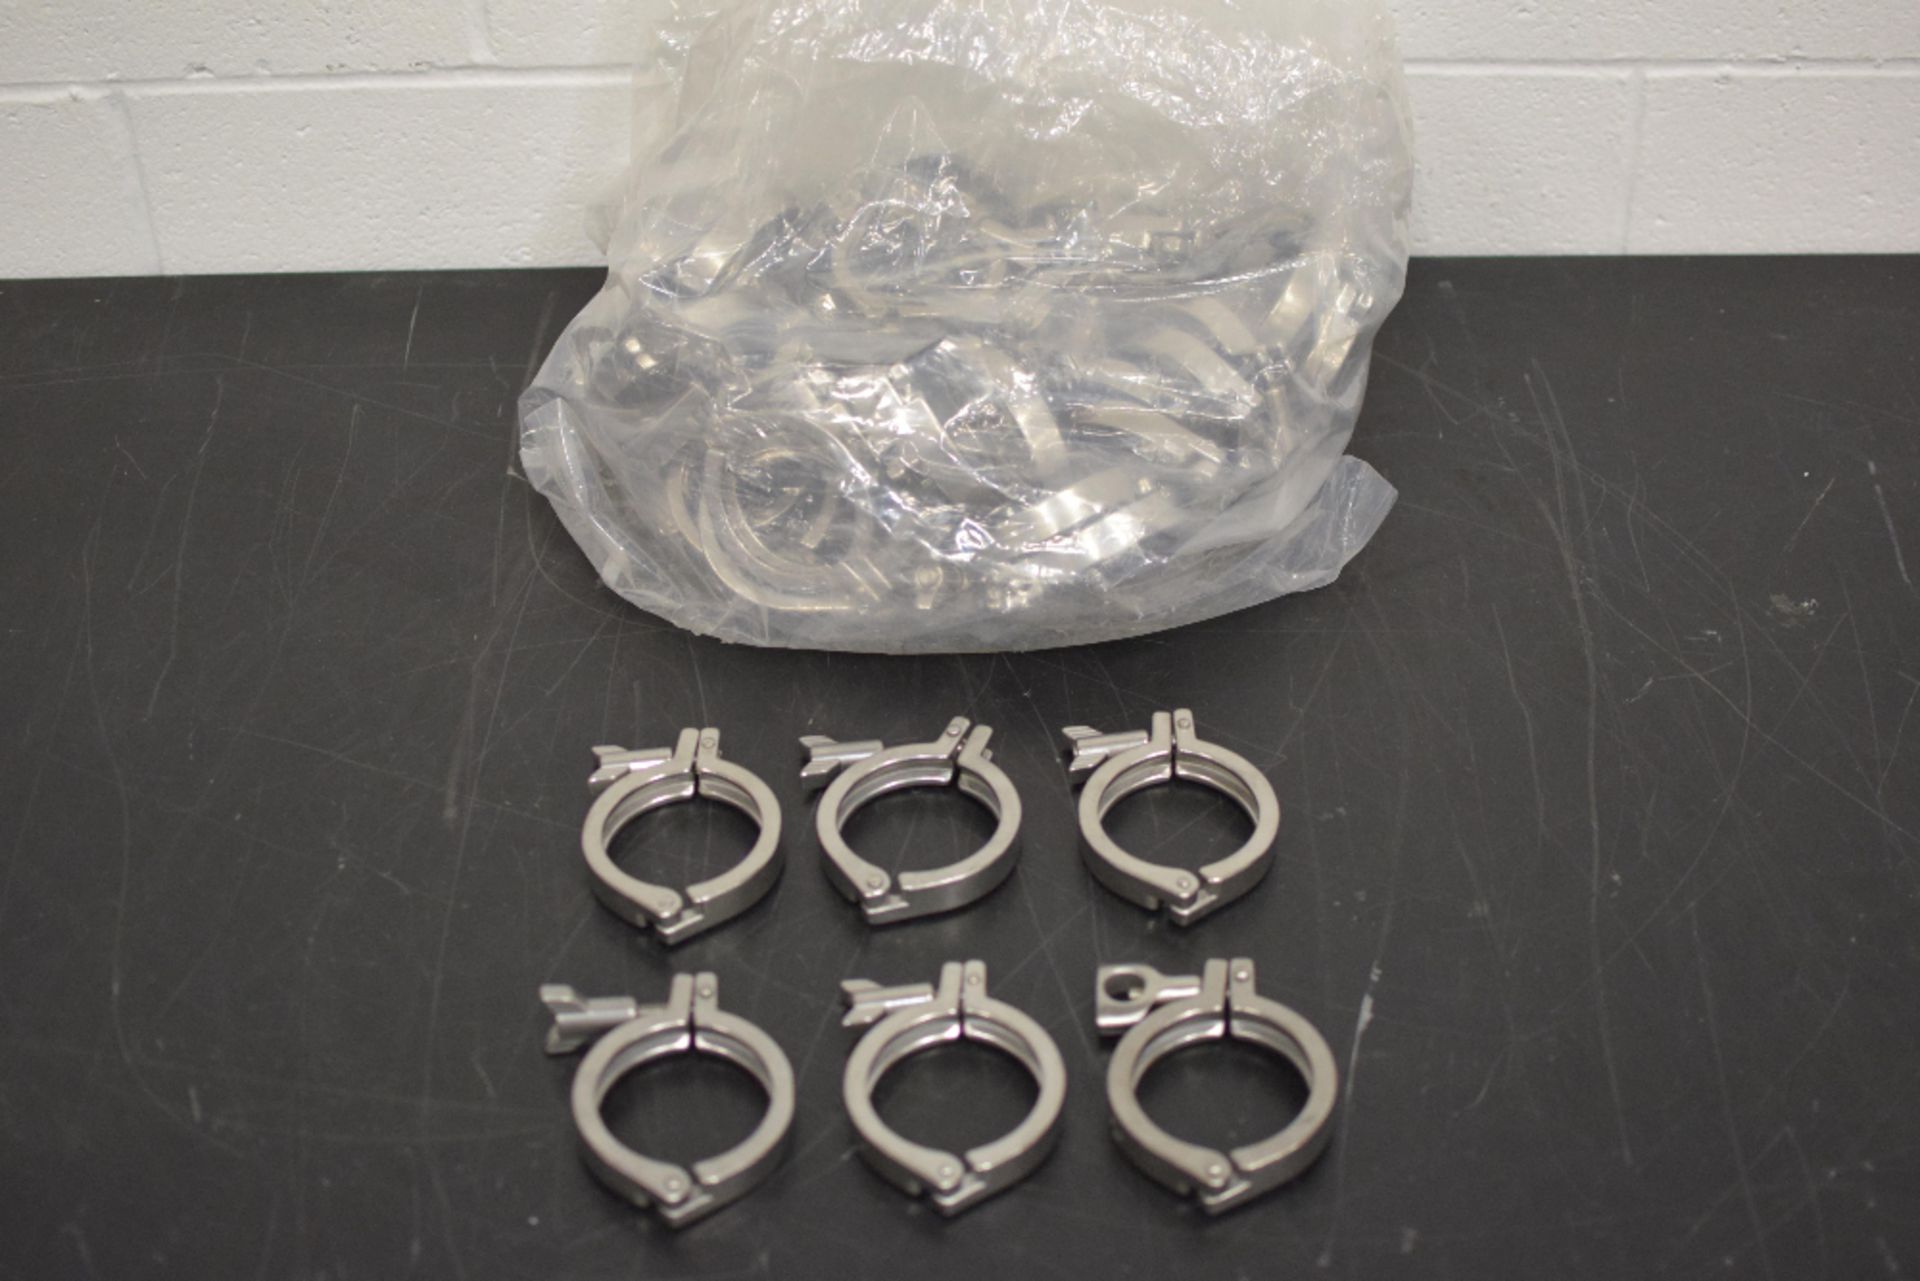 Lot of 3" Stainless Steel Vessel Clamps